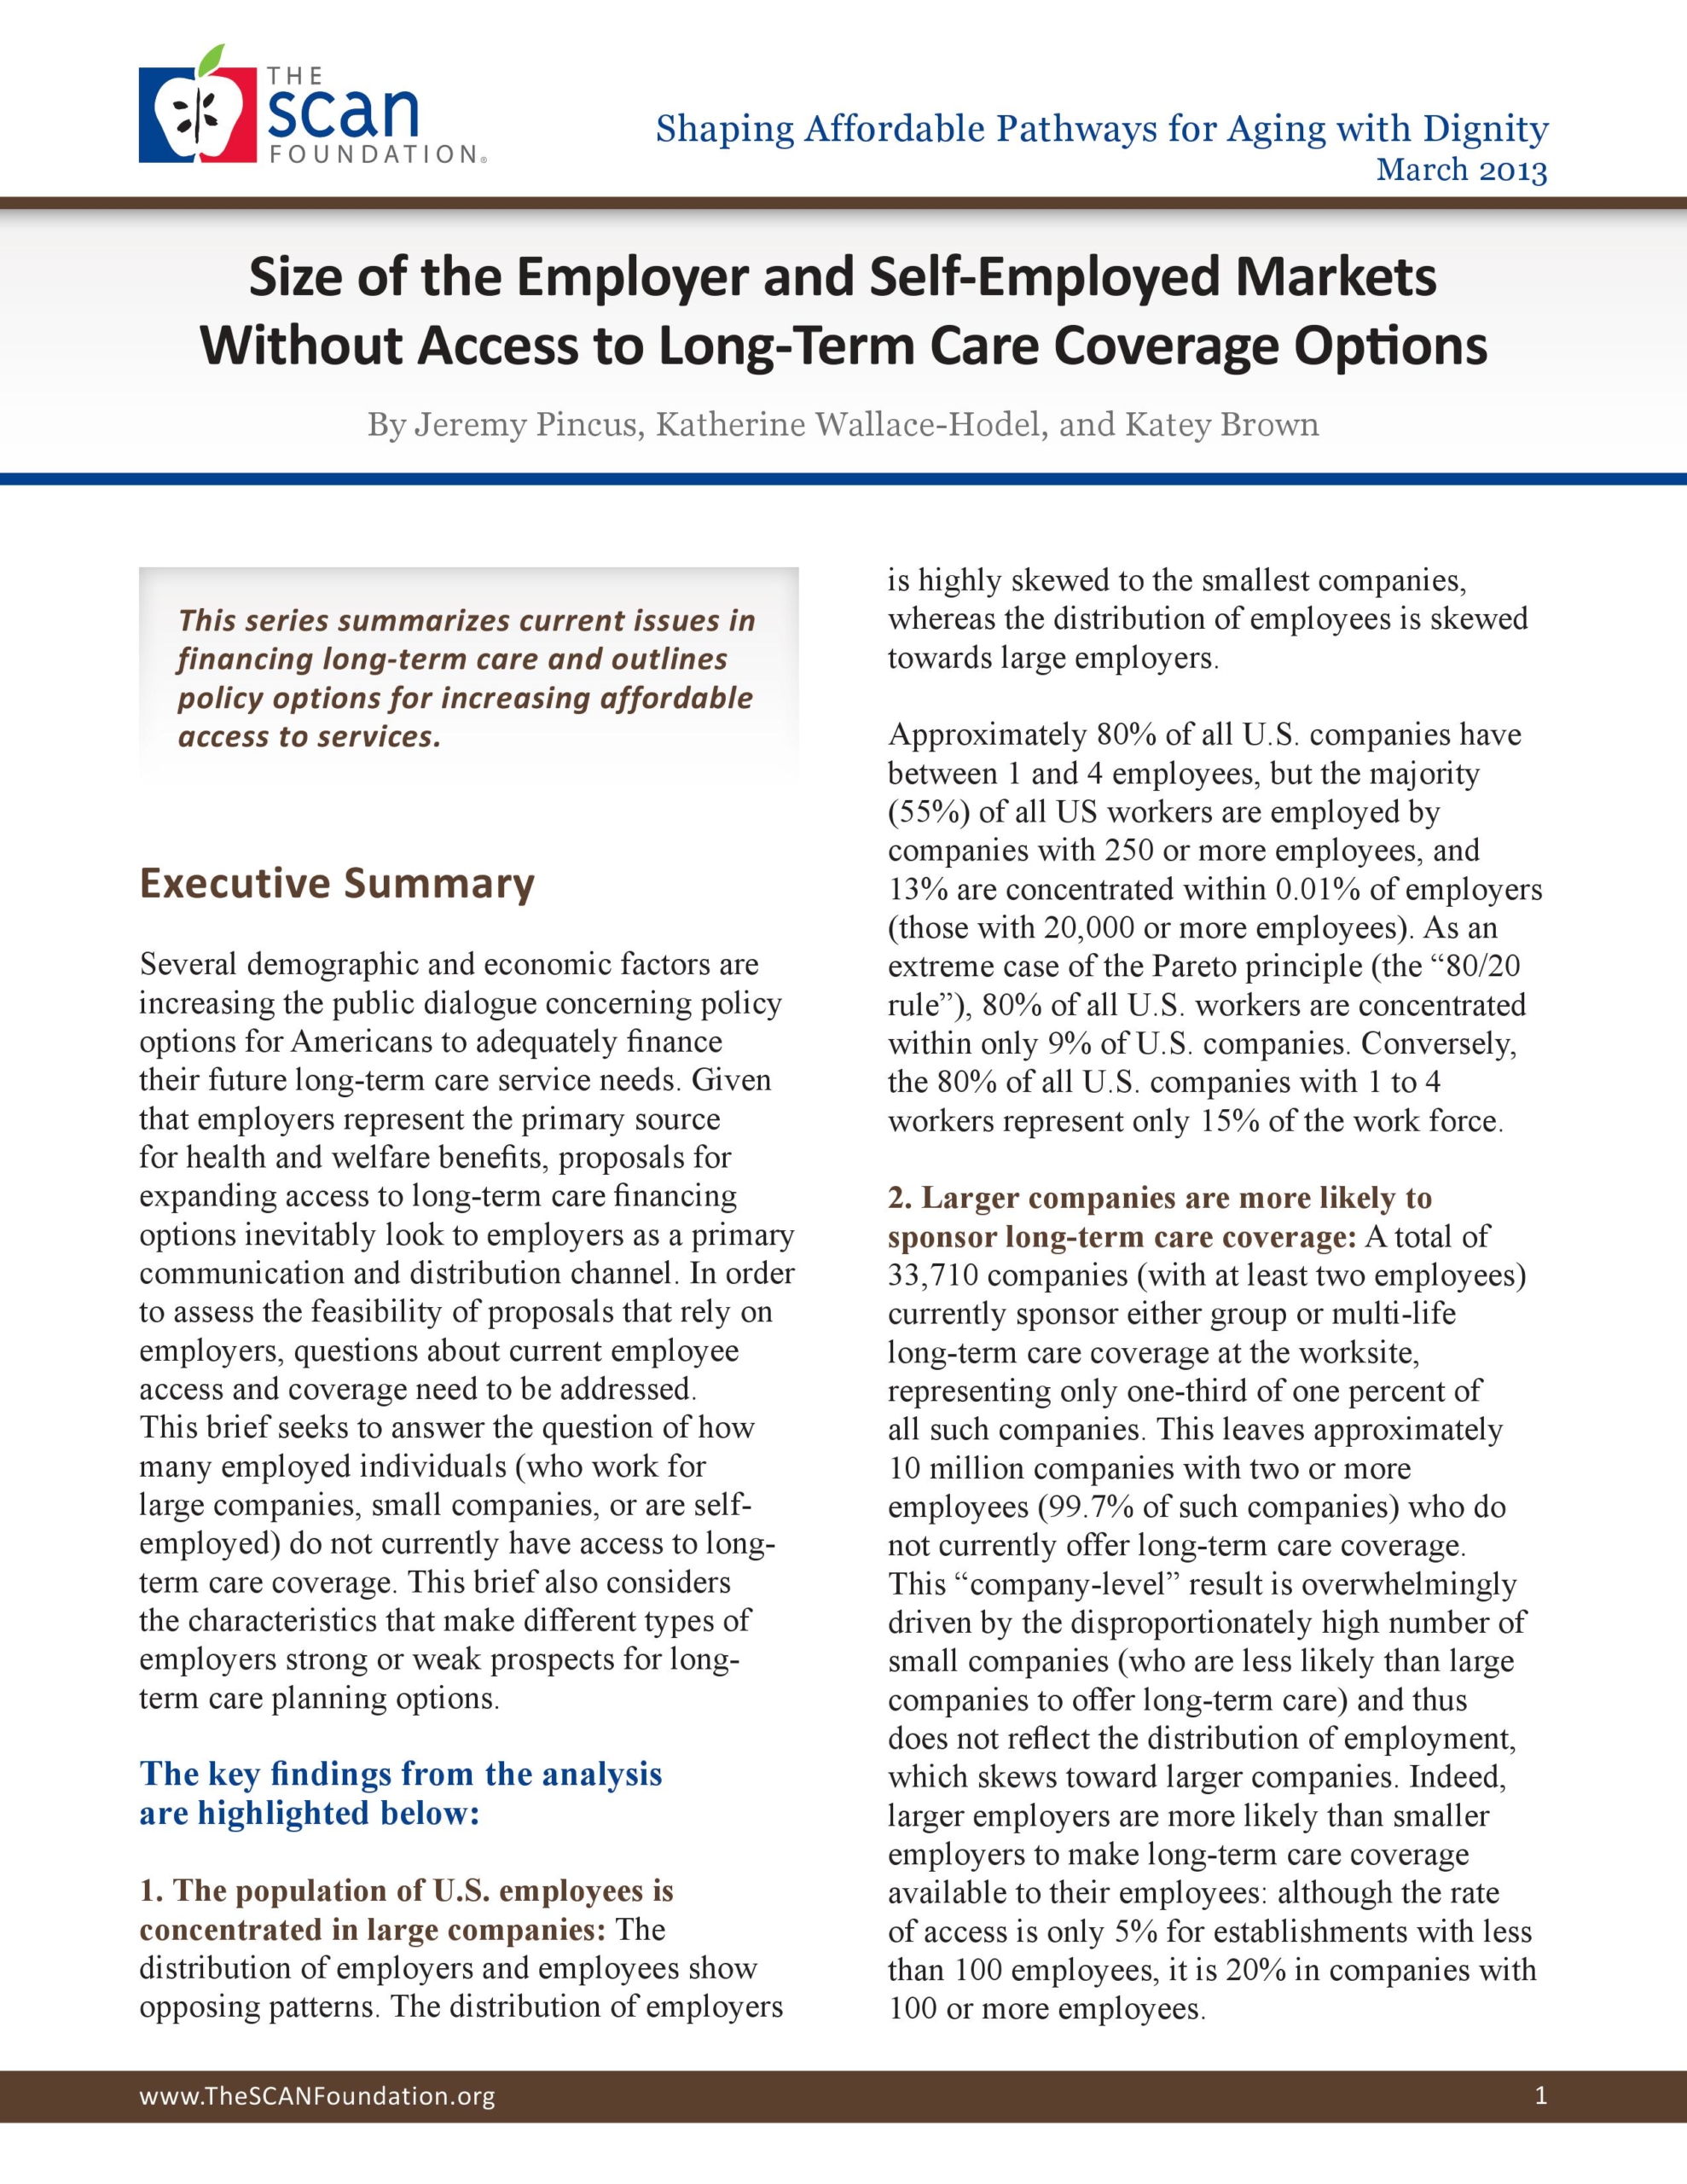 Size of the Employer and Self-Employed Markets Without Access to Long-Term Care Coverage Options